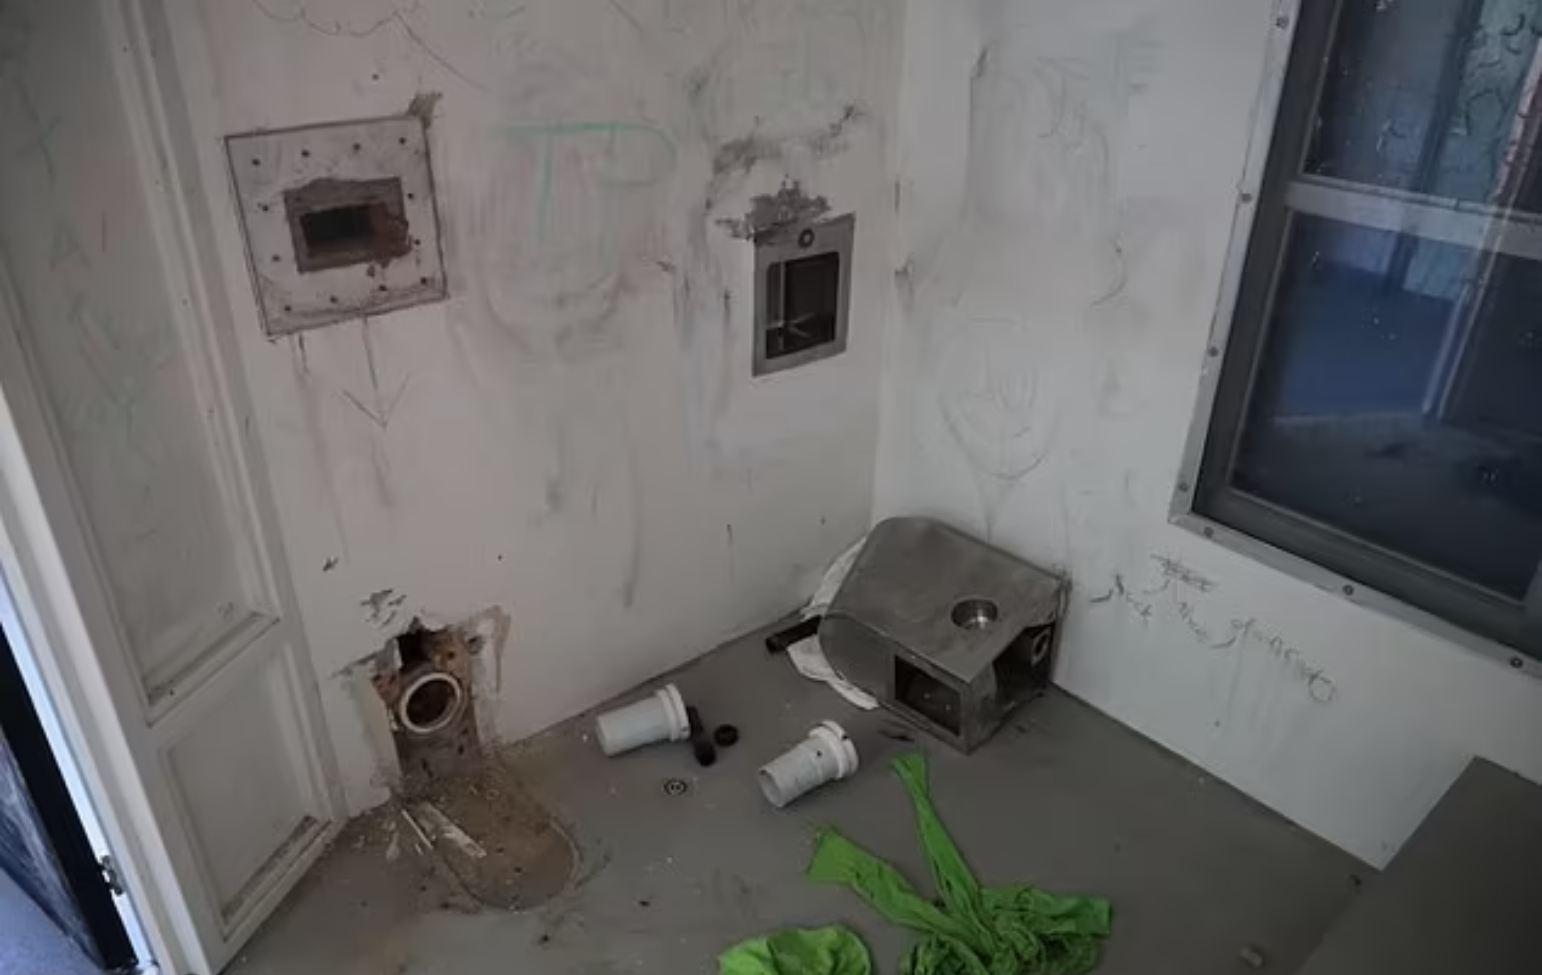 Officials say the detainees have been destroying property, escaping from their cells, assaulting staff and harming themselves at Banksia Hill youth detention centre in Perth (pictured). Credit: Department of Justice